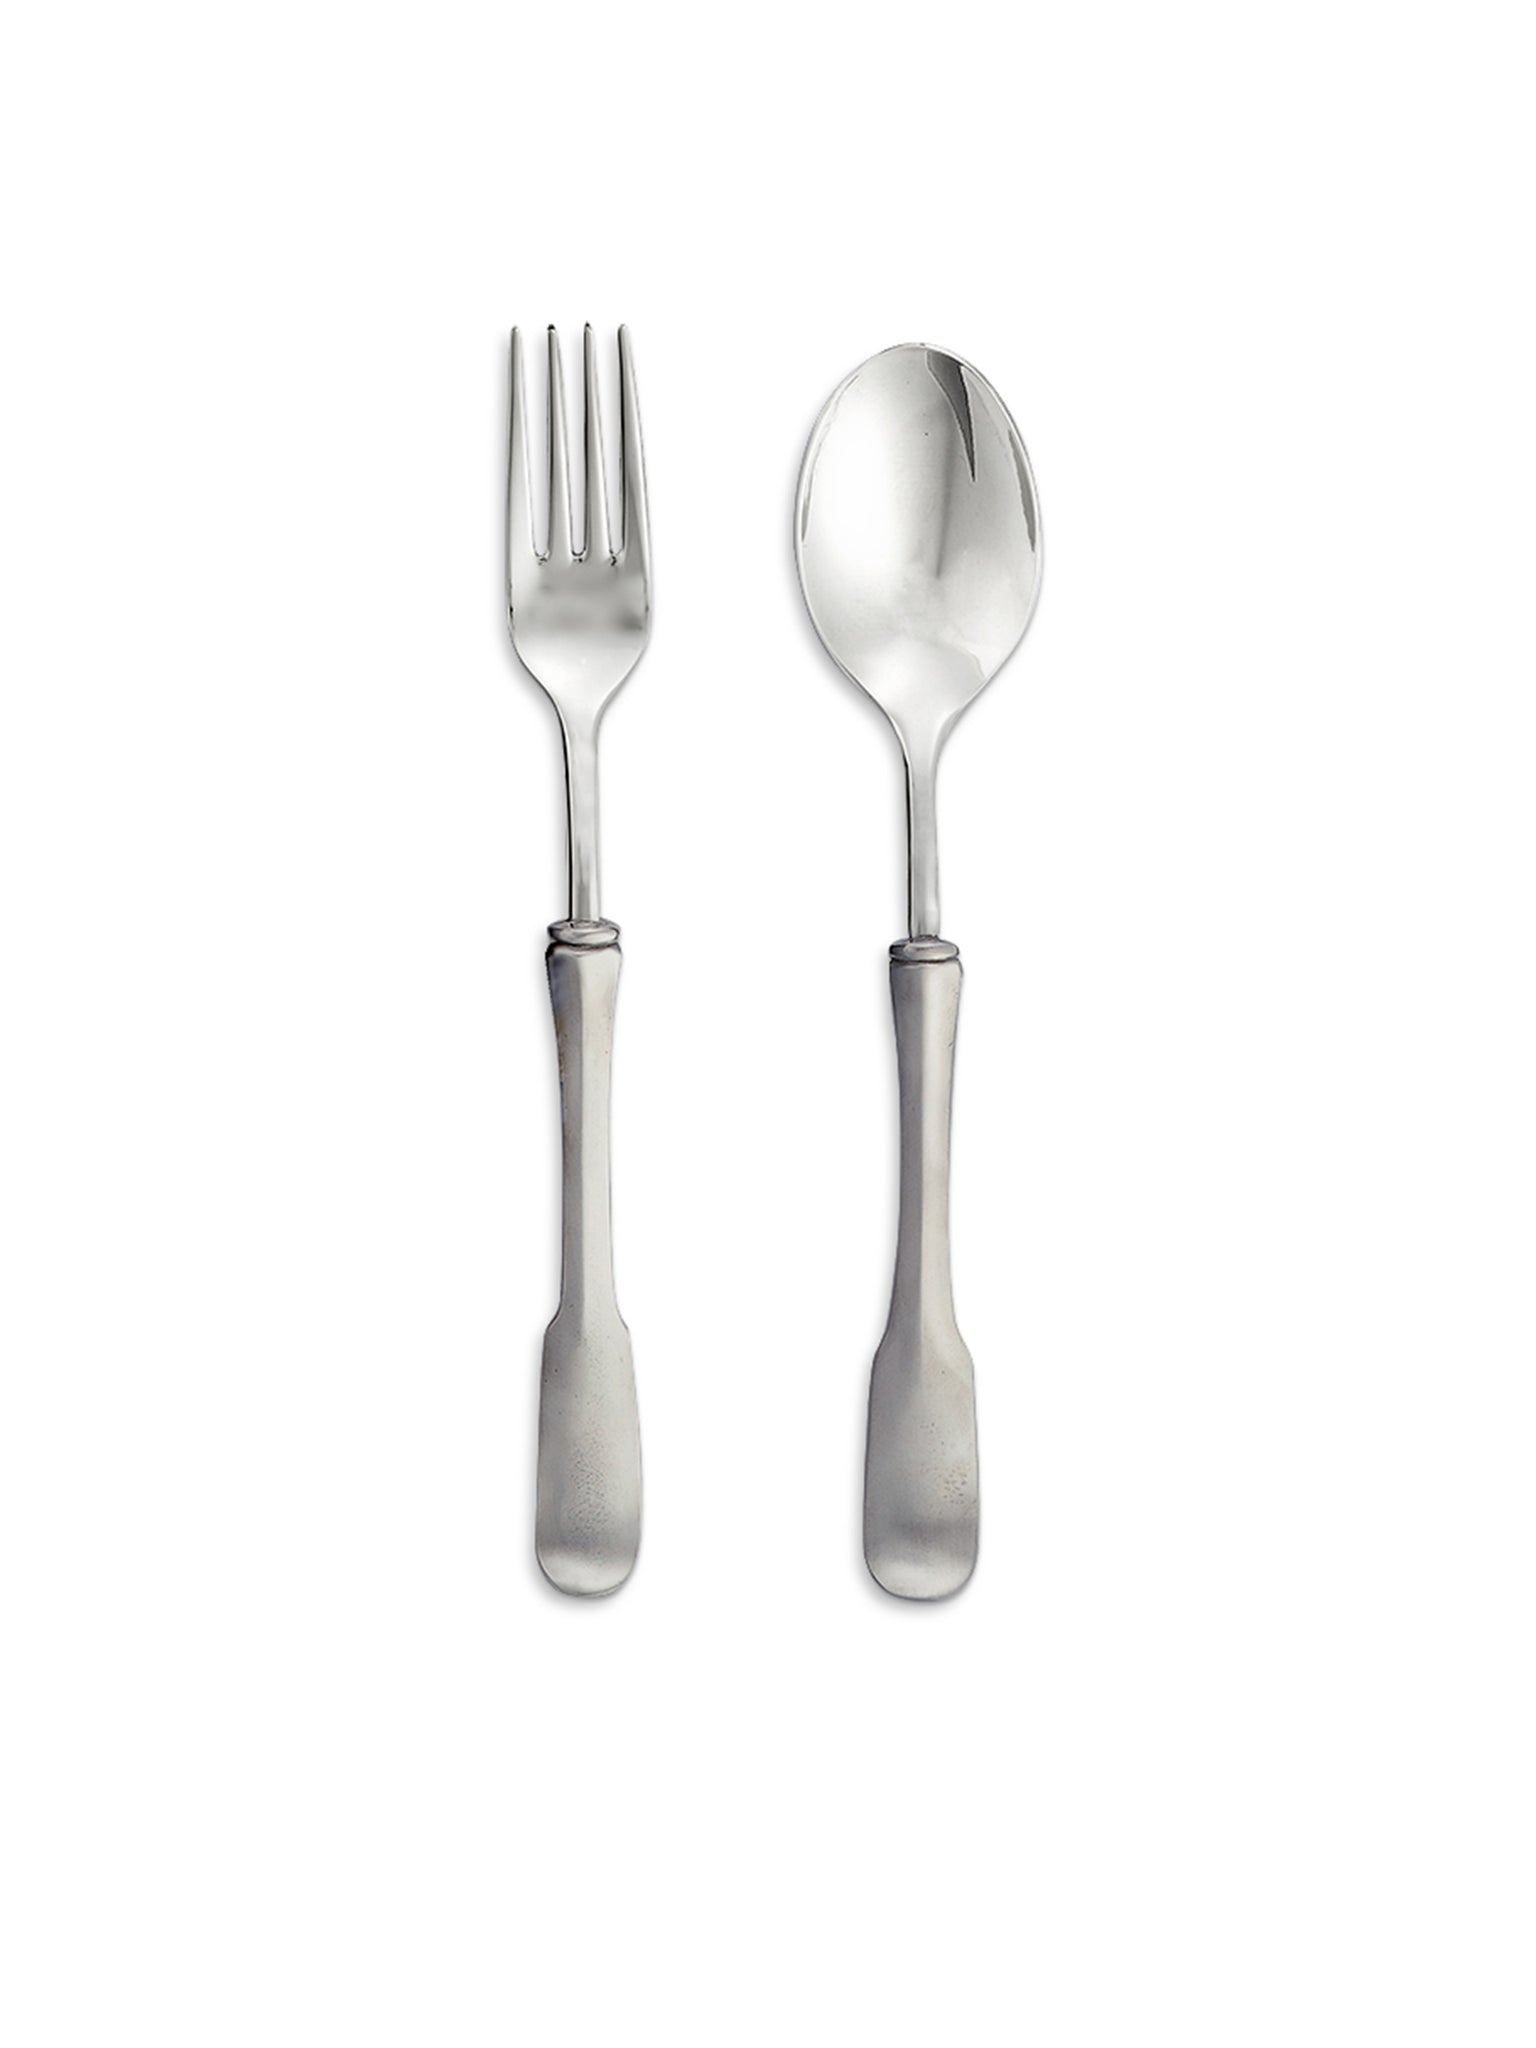 MATCH Pewter Olivia Fork & Spoon Weston Table